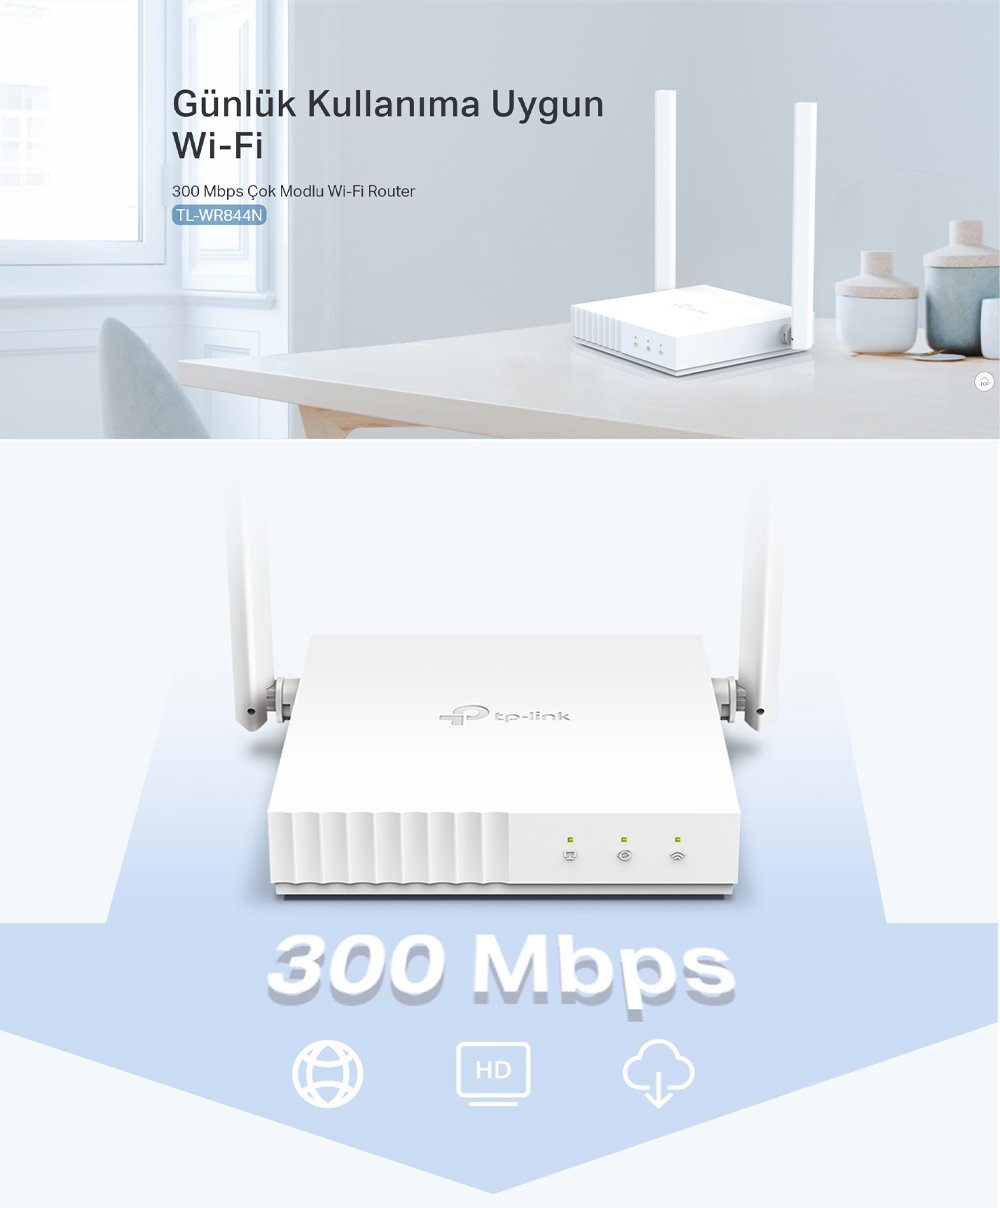 TP-Link TL-WR844N 300 Mbps 5 dBi Multi-Mode Wifi Router